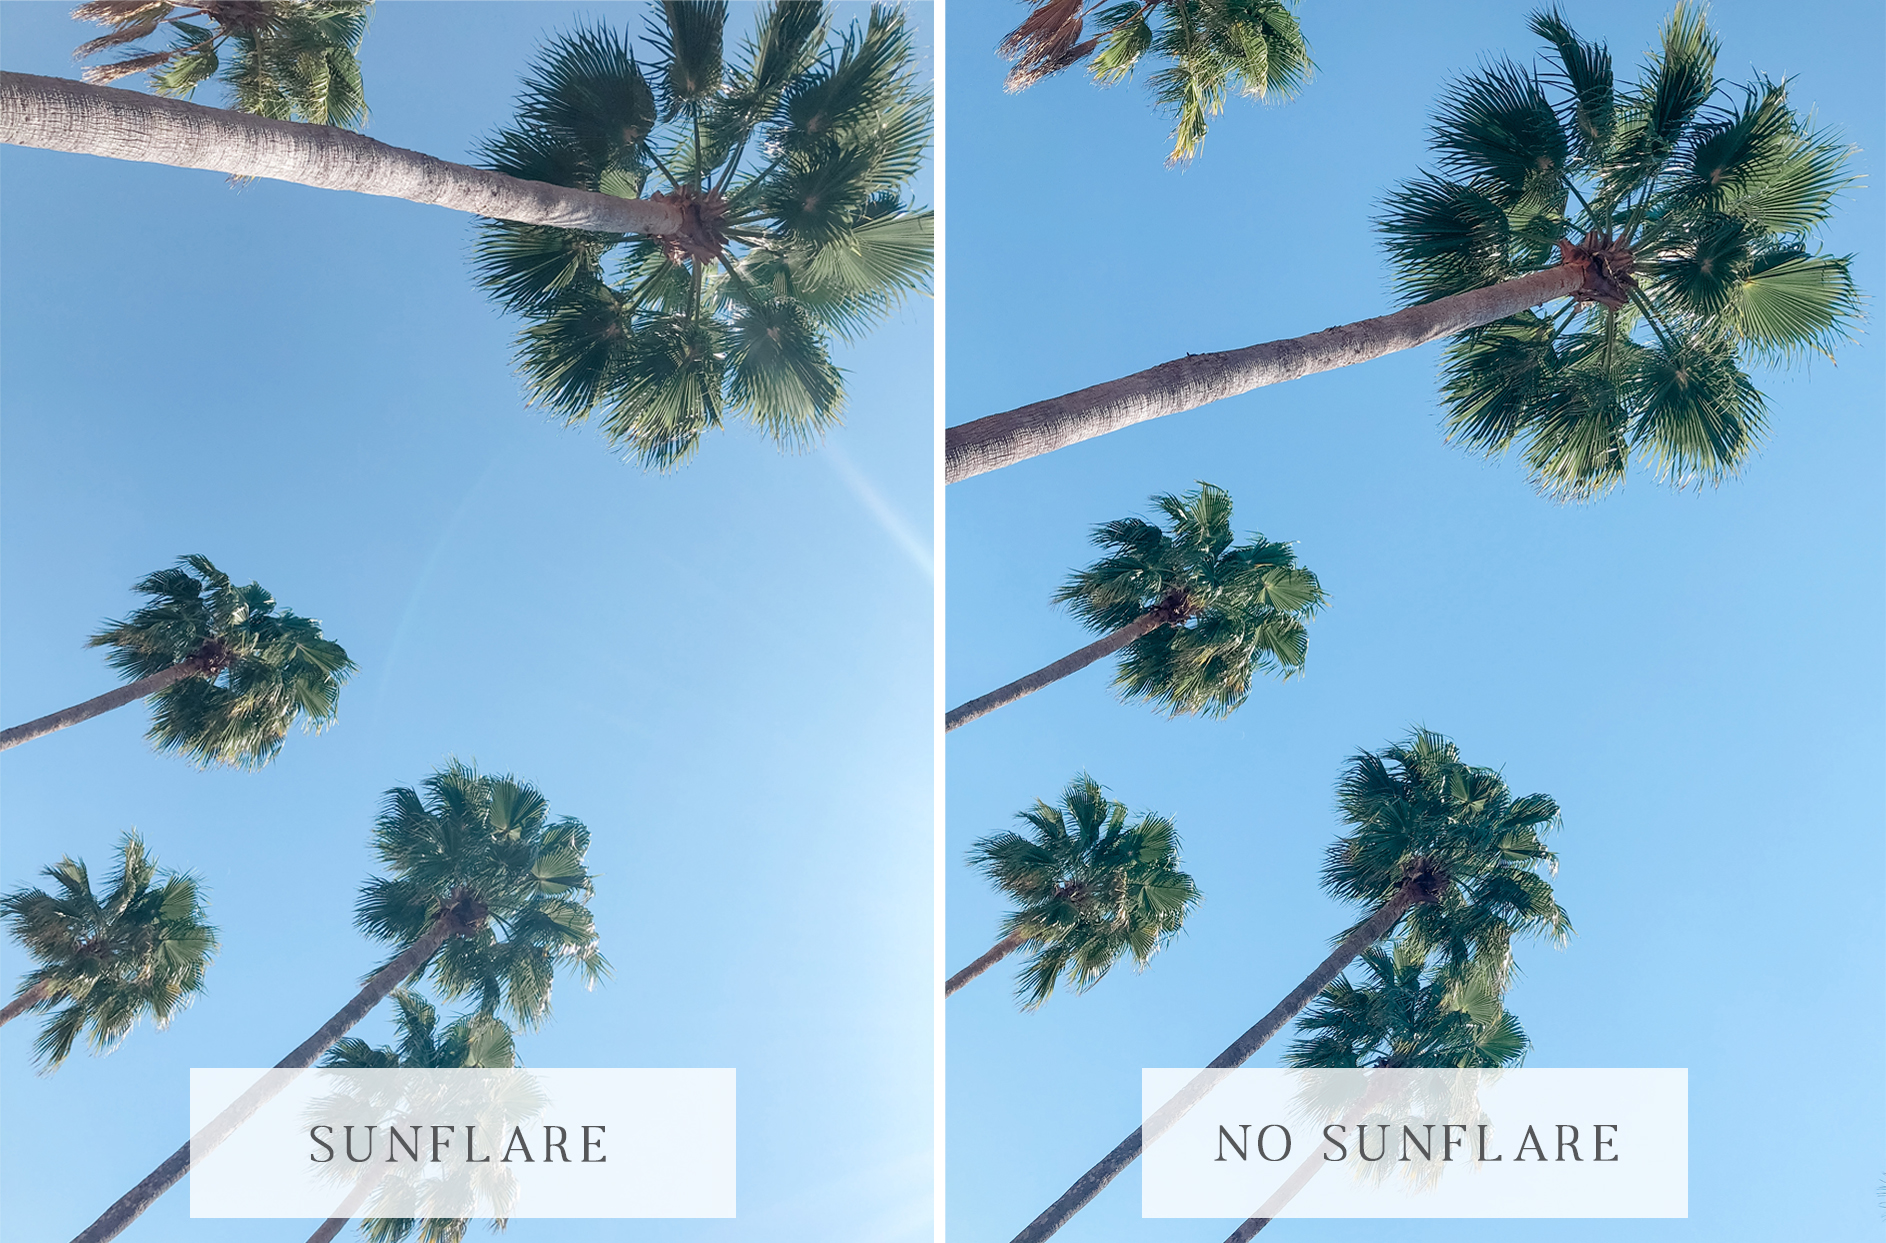 Before image of what sunflare looks like on an iphone photo and after image of what an iphone photo looks like without sunflare.